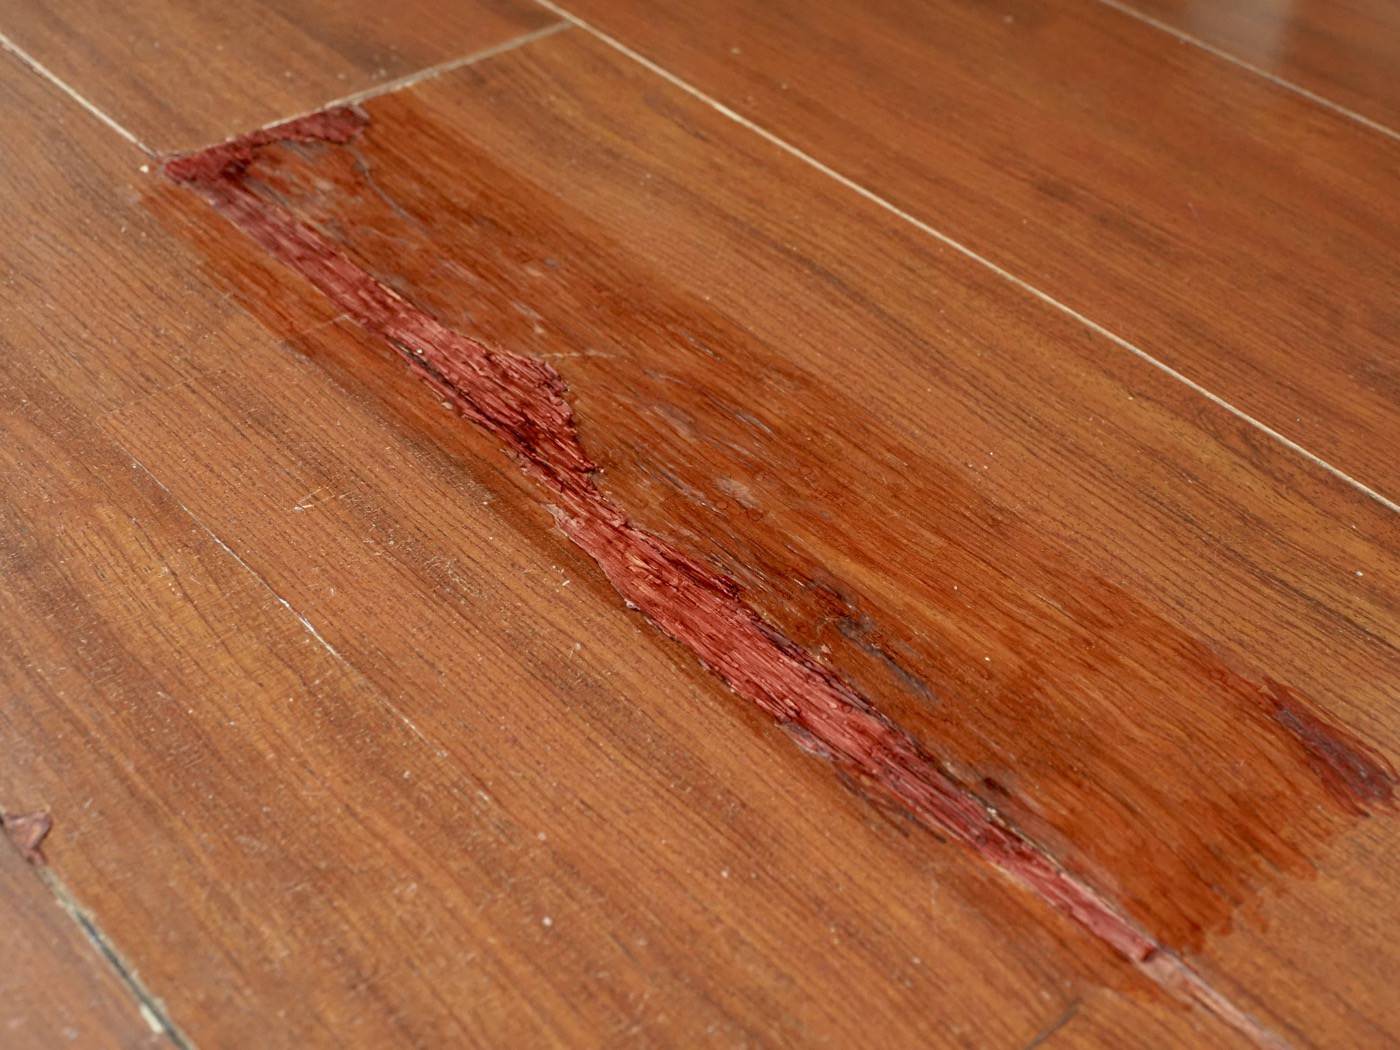 Repaired badly cracked flooring with diy 00001